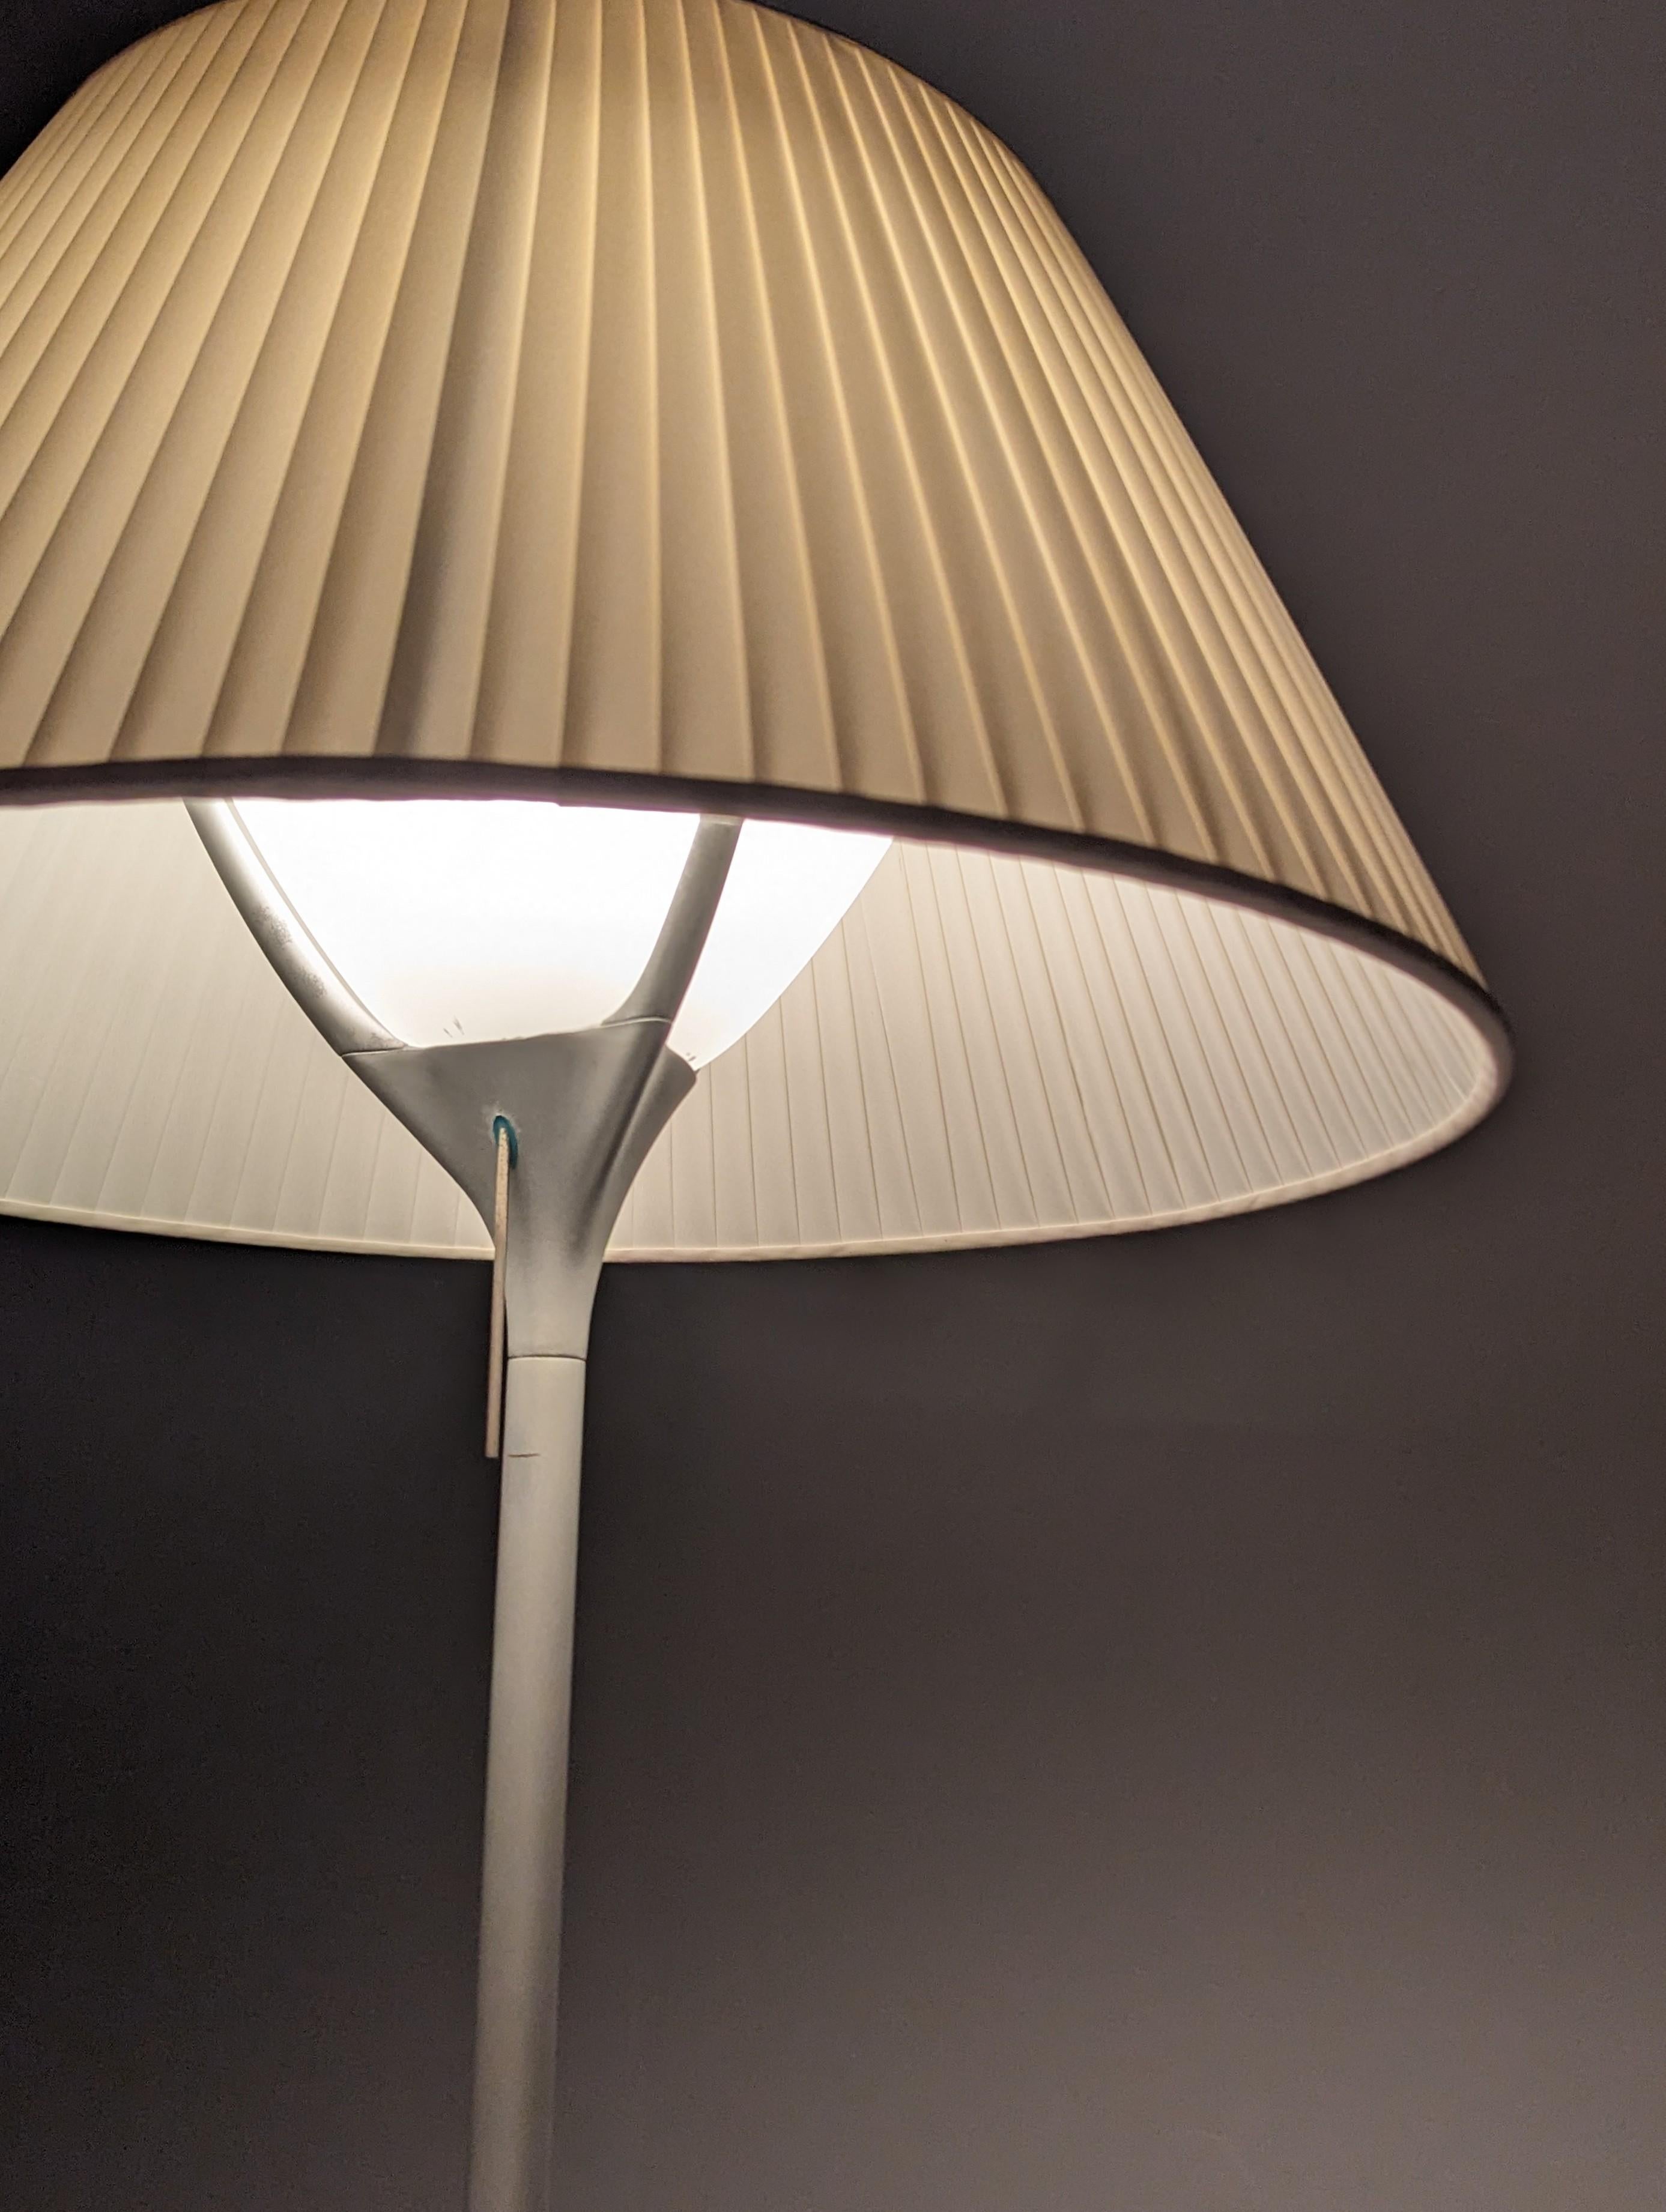 Elegant large lamp designed by Philippe Starck for Flos with original pleated lampshade.

